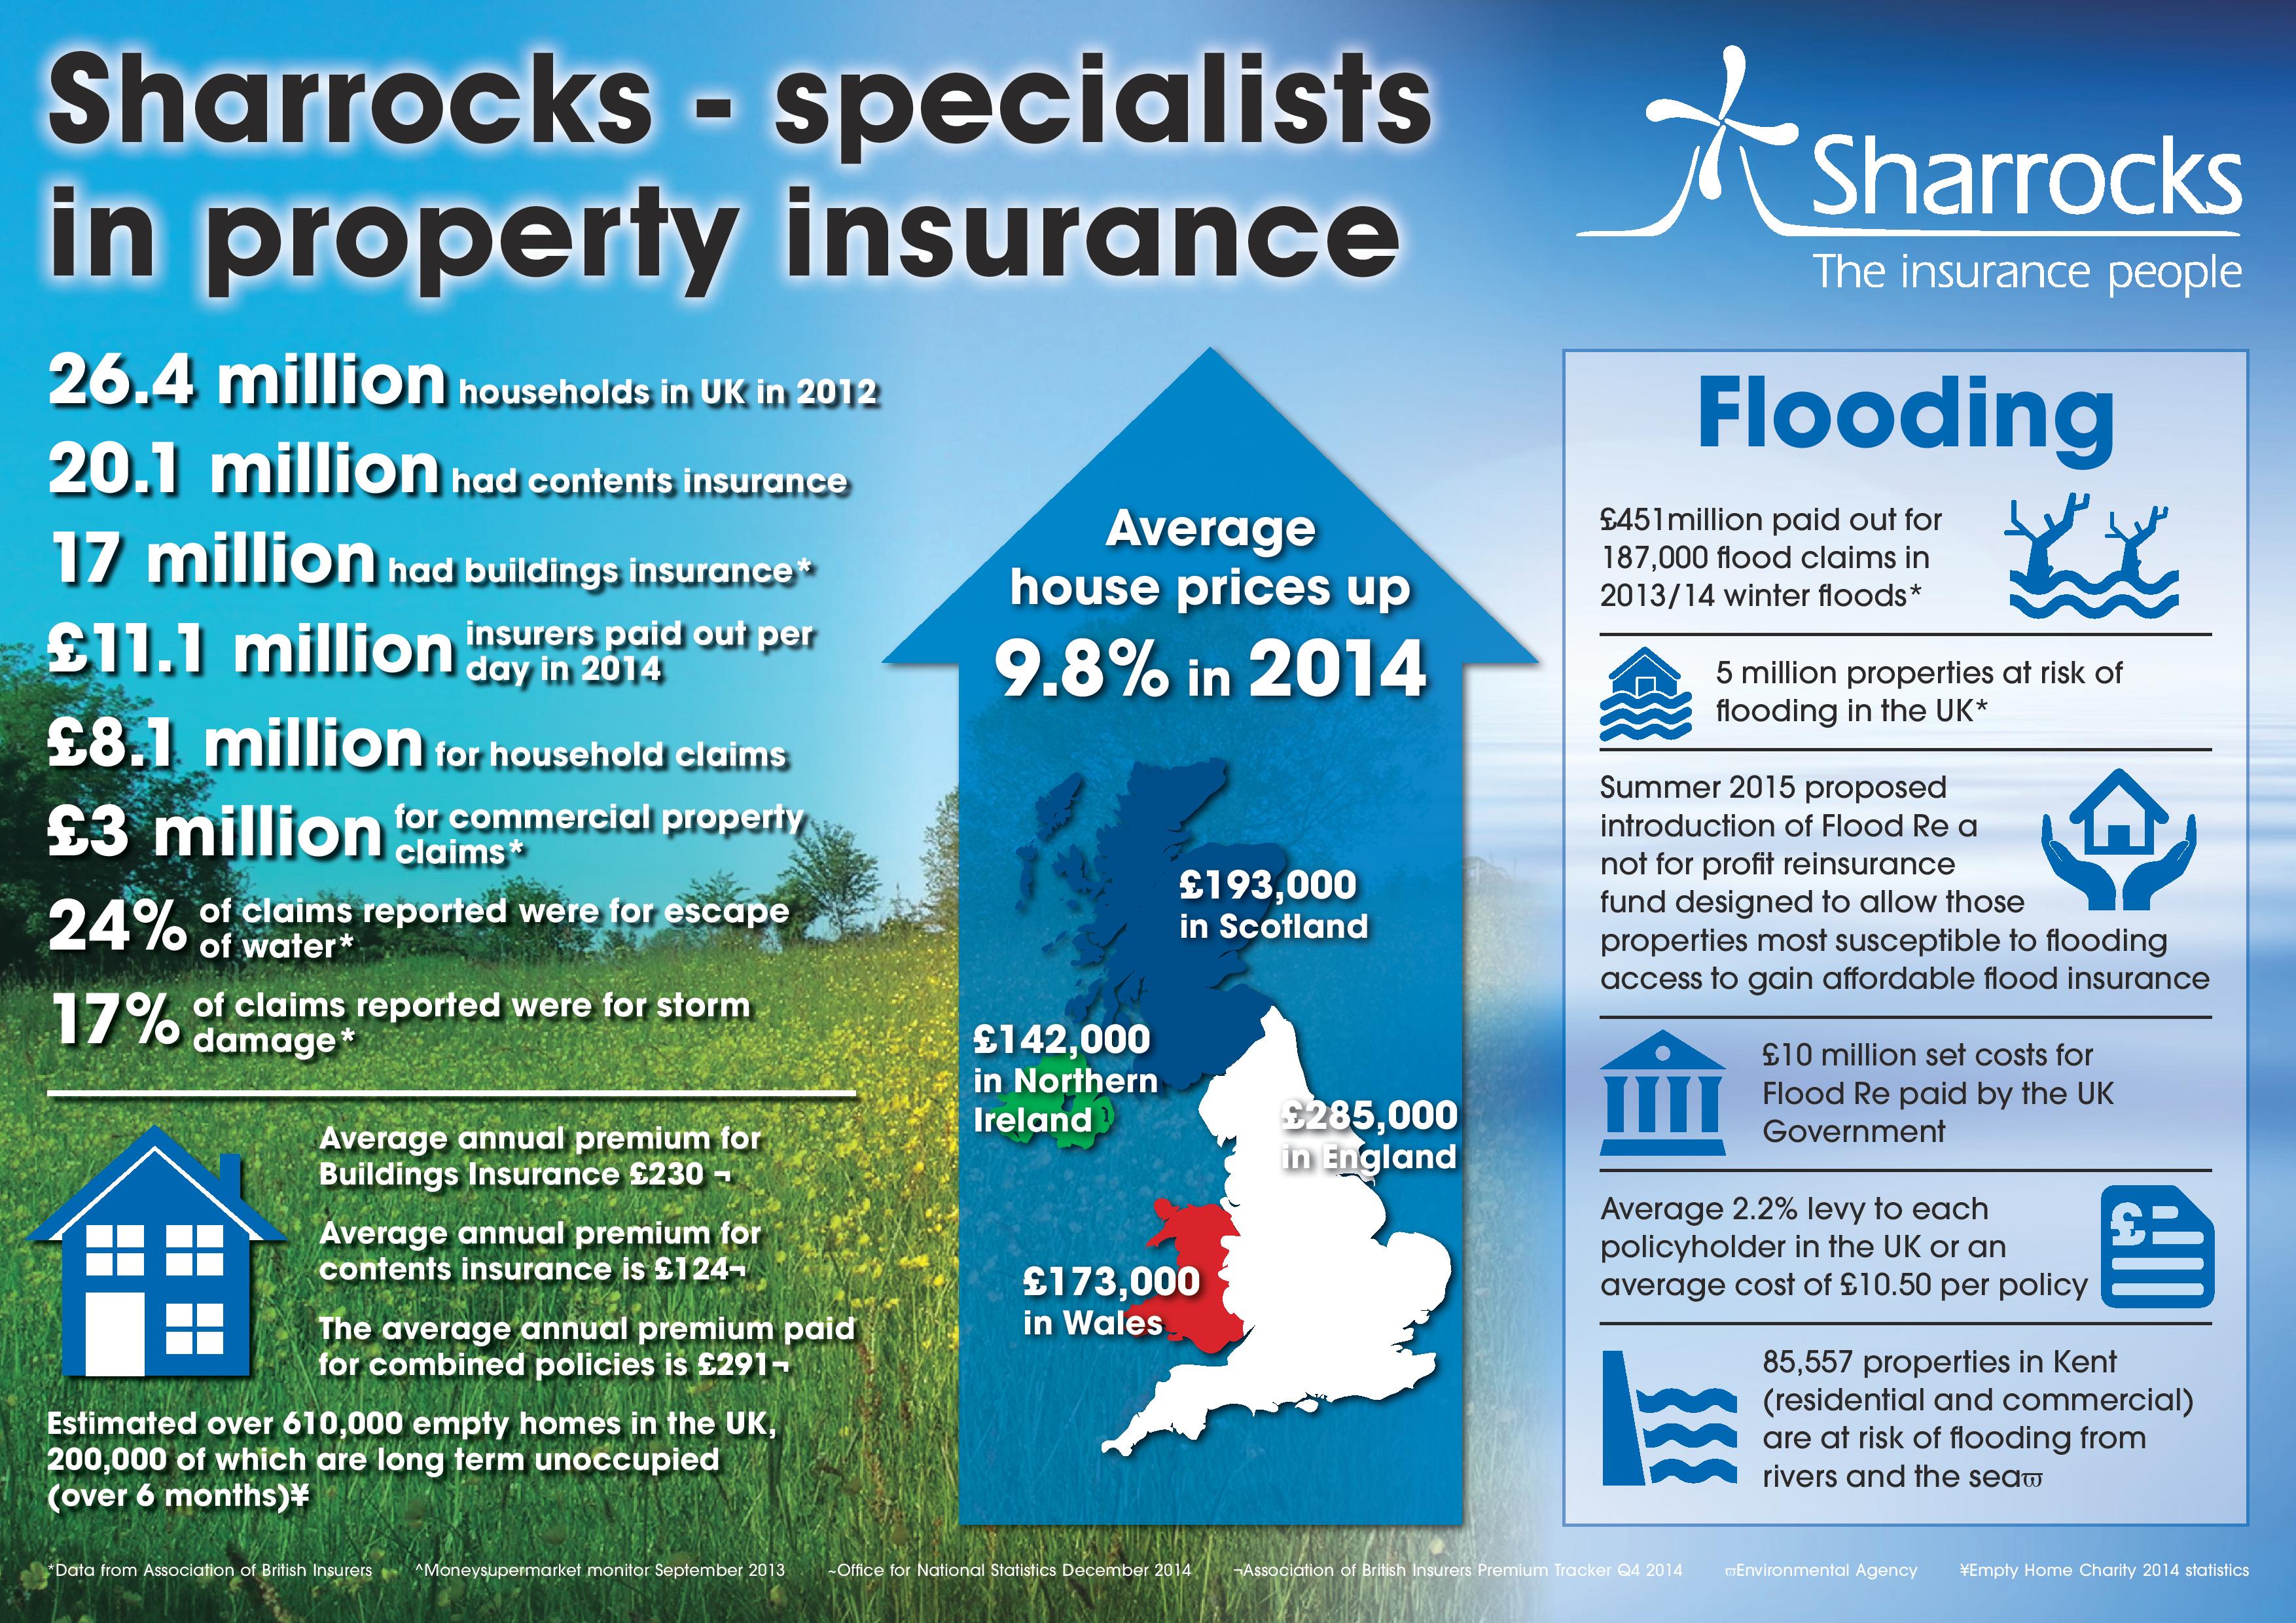 Sharrocks - specialists in property insurance infographic June 2015